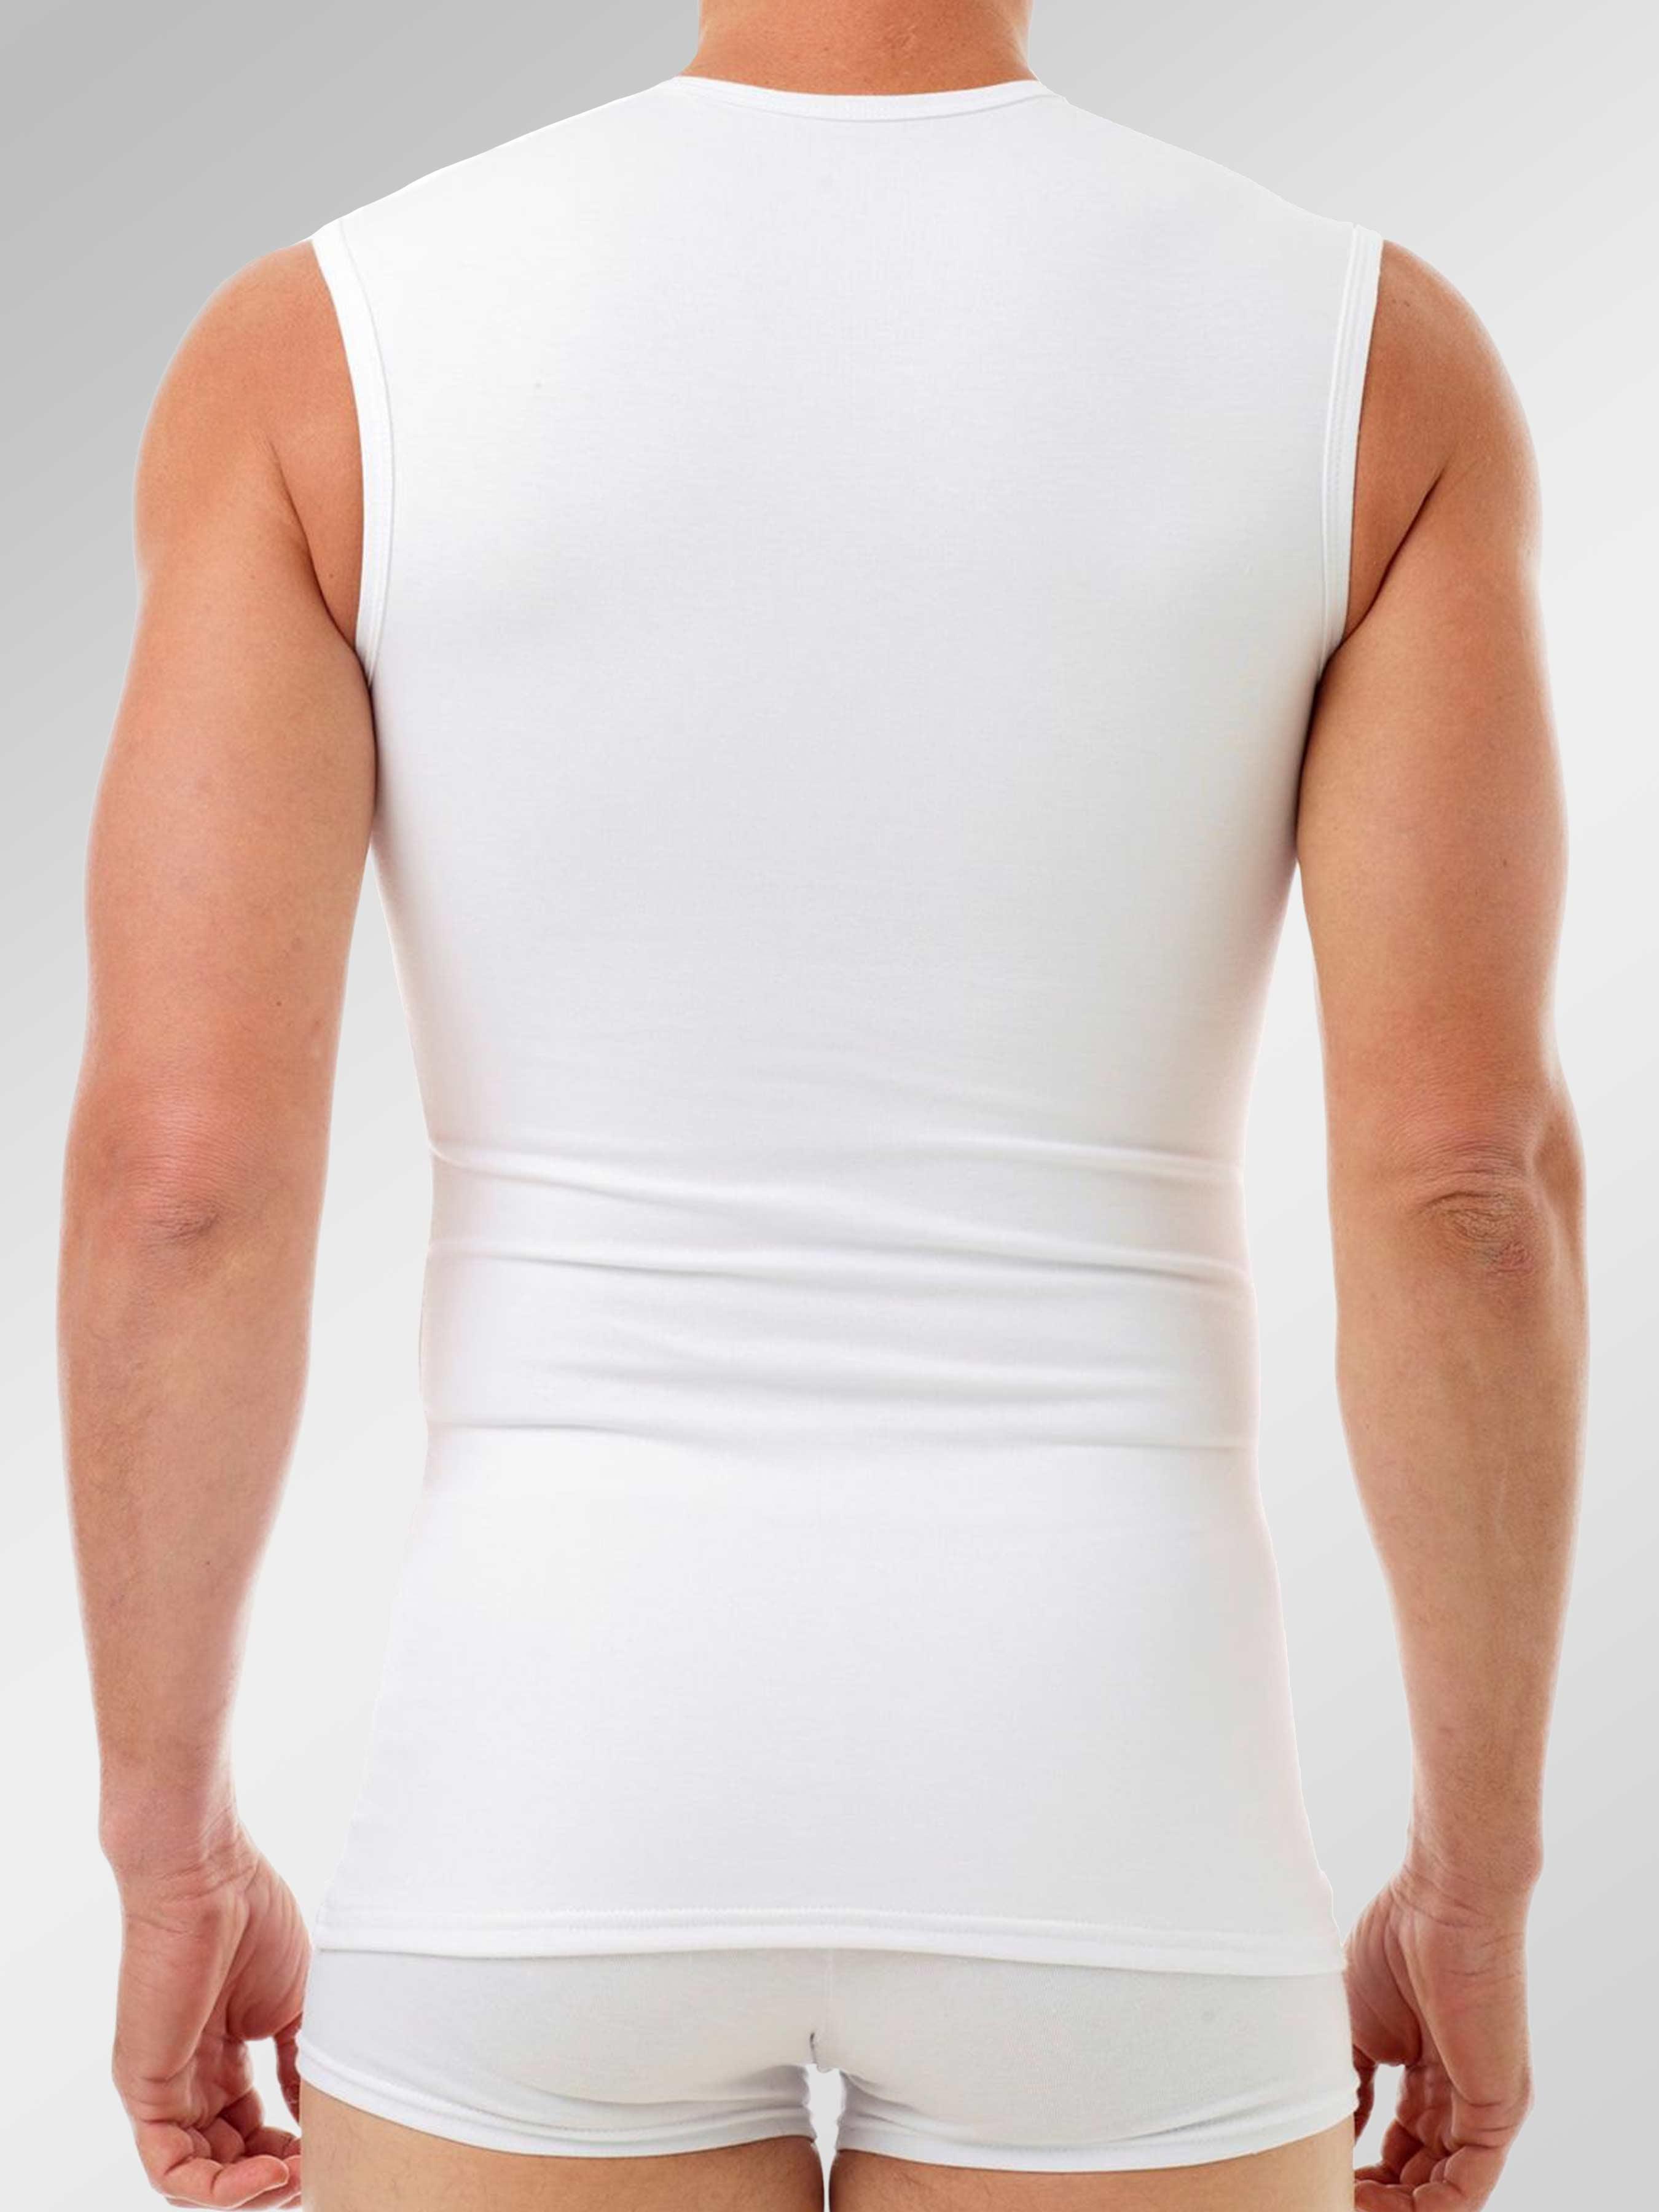 Compression Muscle Shirt - XBODY UK